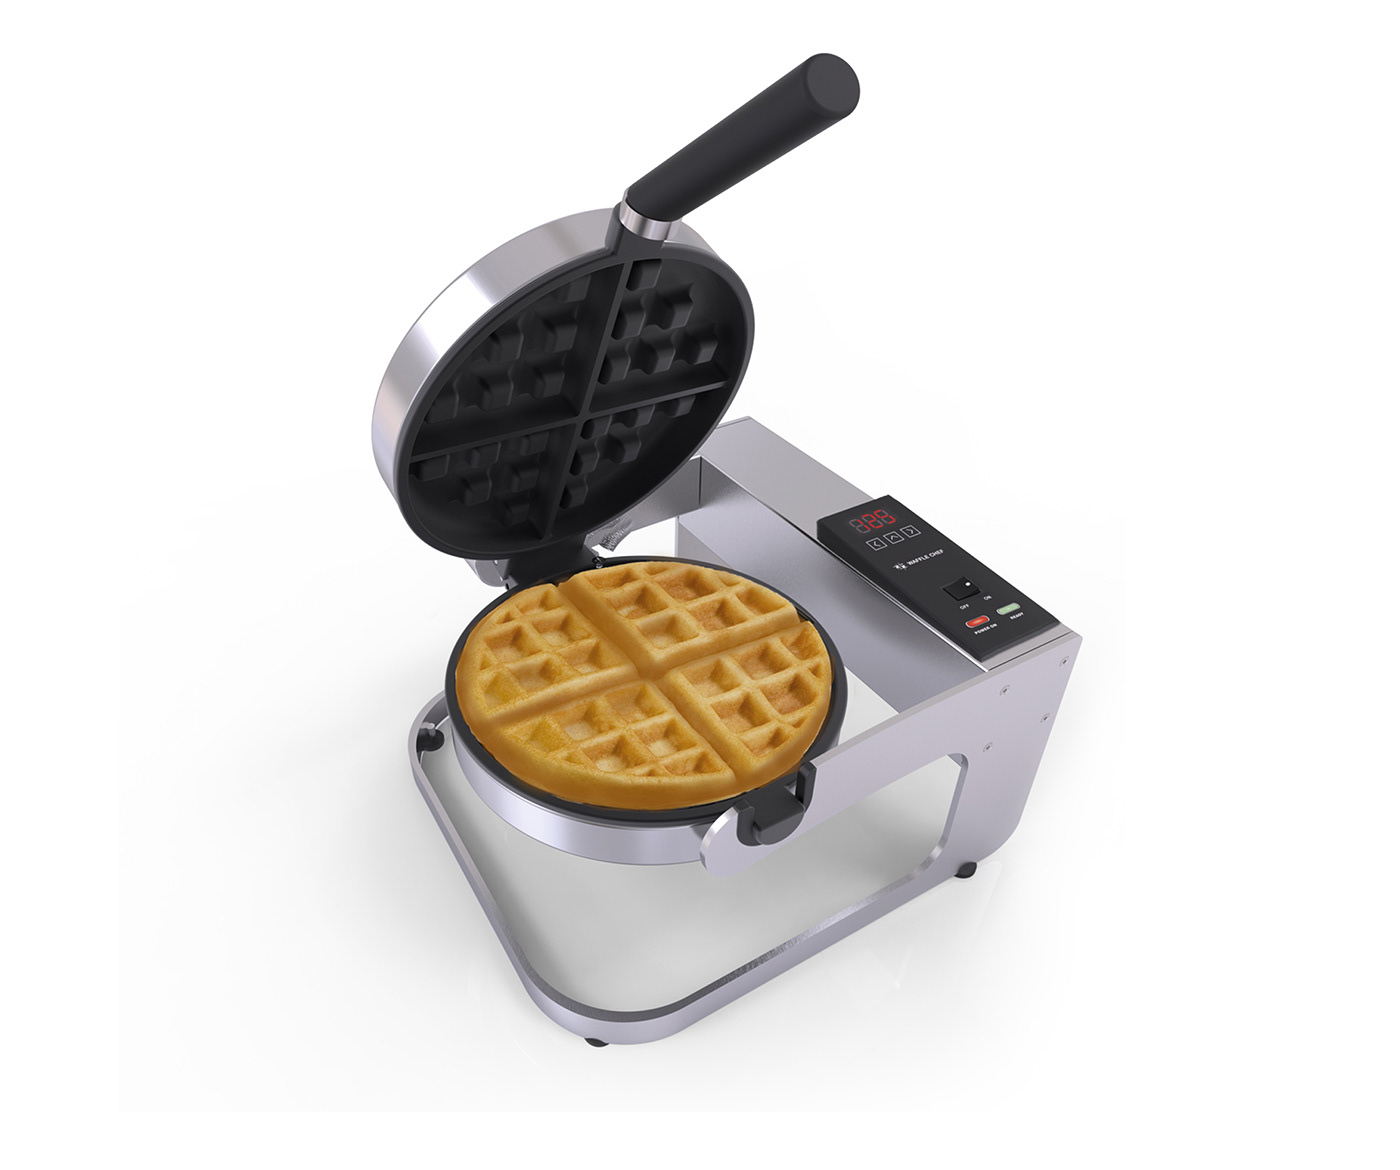 Waffle iron maker product design  chef industrial design  waffle Food  professional